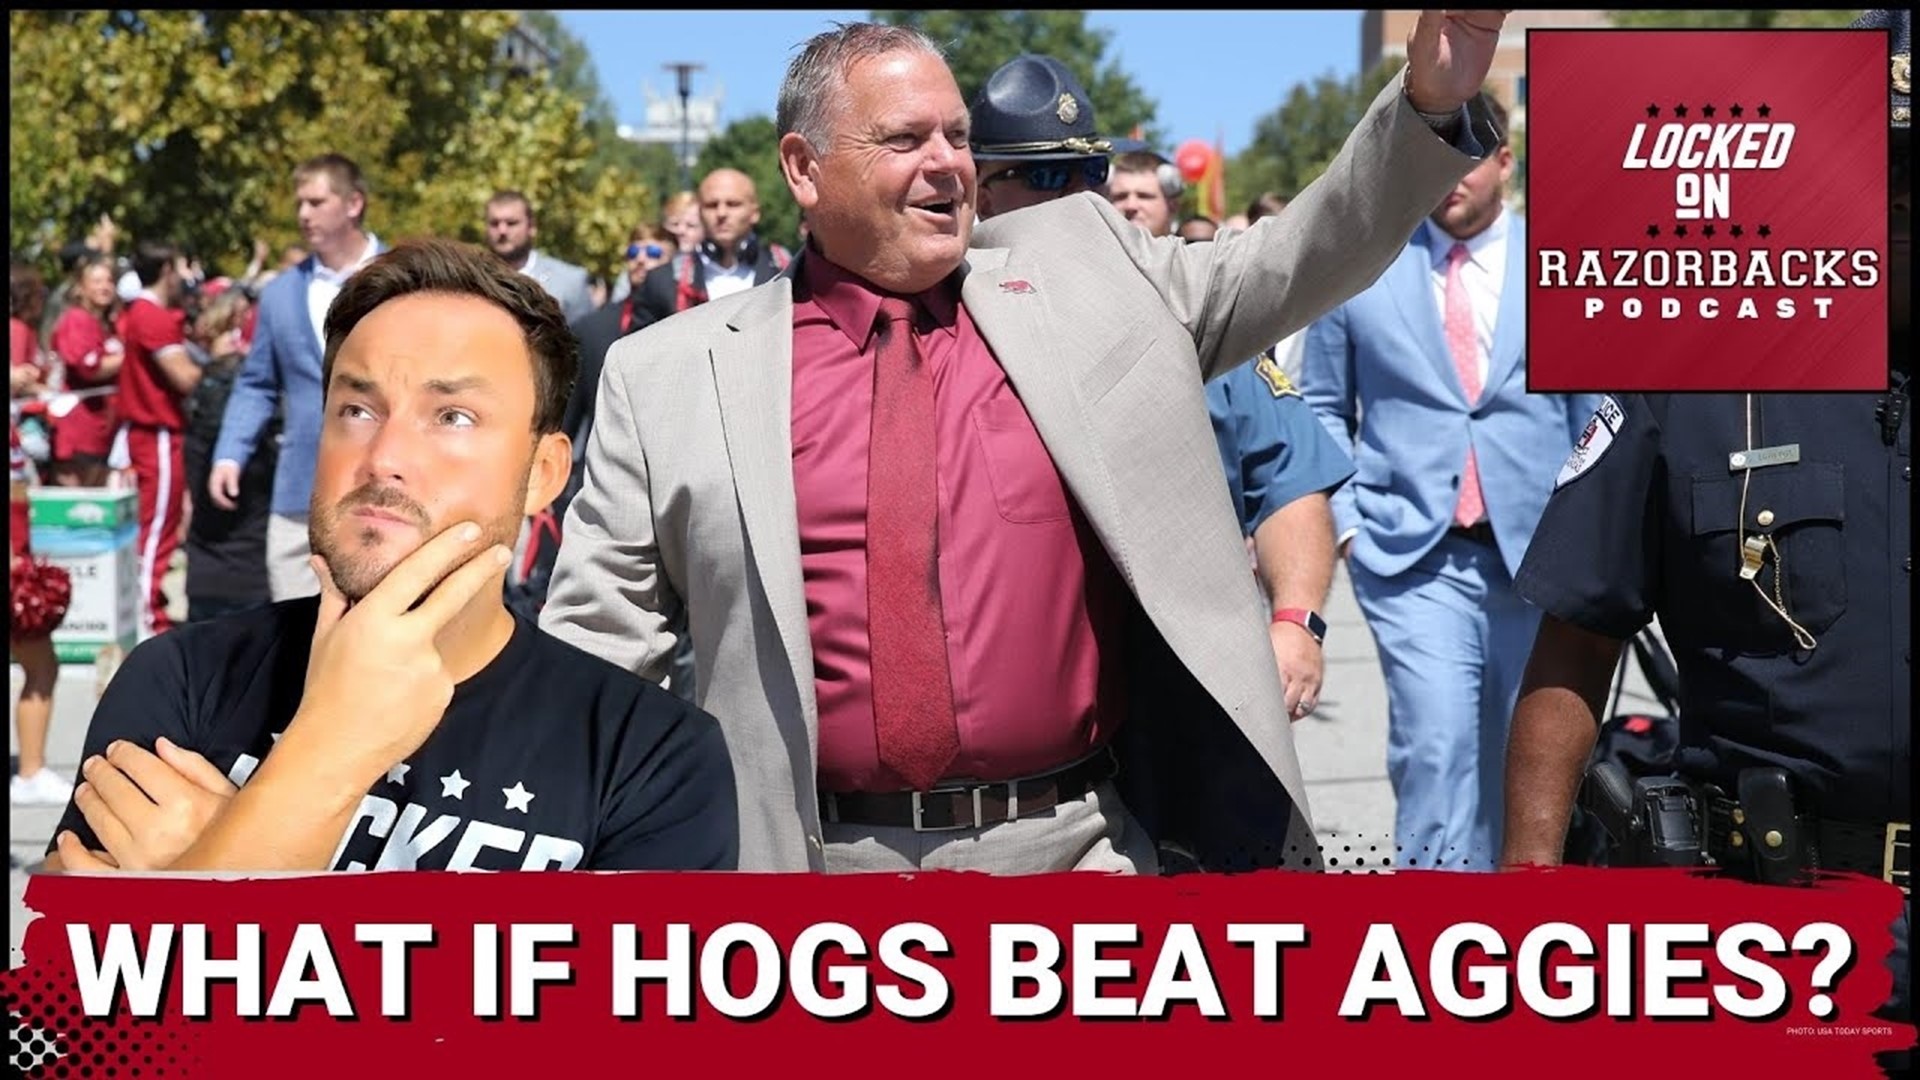 Sam Pittman and Jimbo Fisher both know how important this Saturday's Southwest Classic game is. So what if the Hogs are able to beat the Aggies in Jerry World?